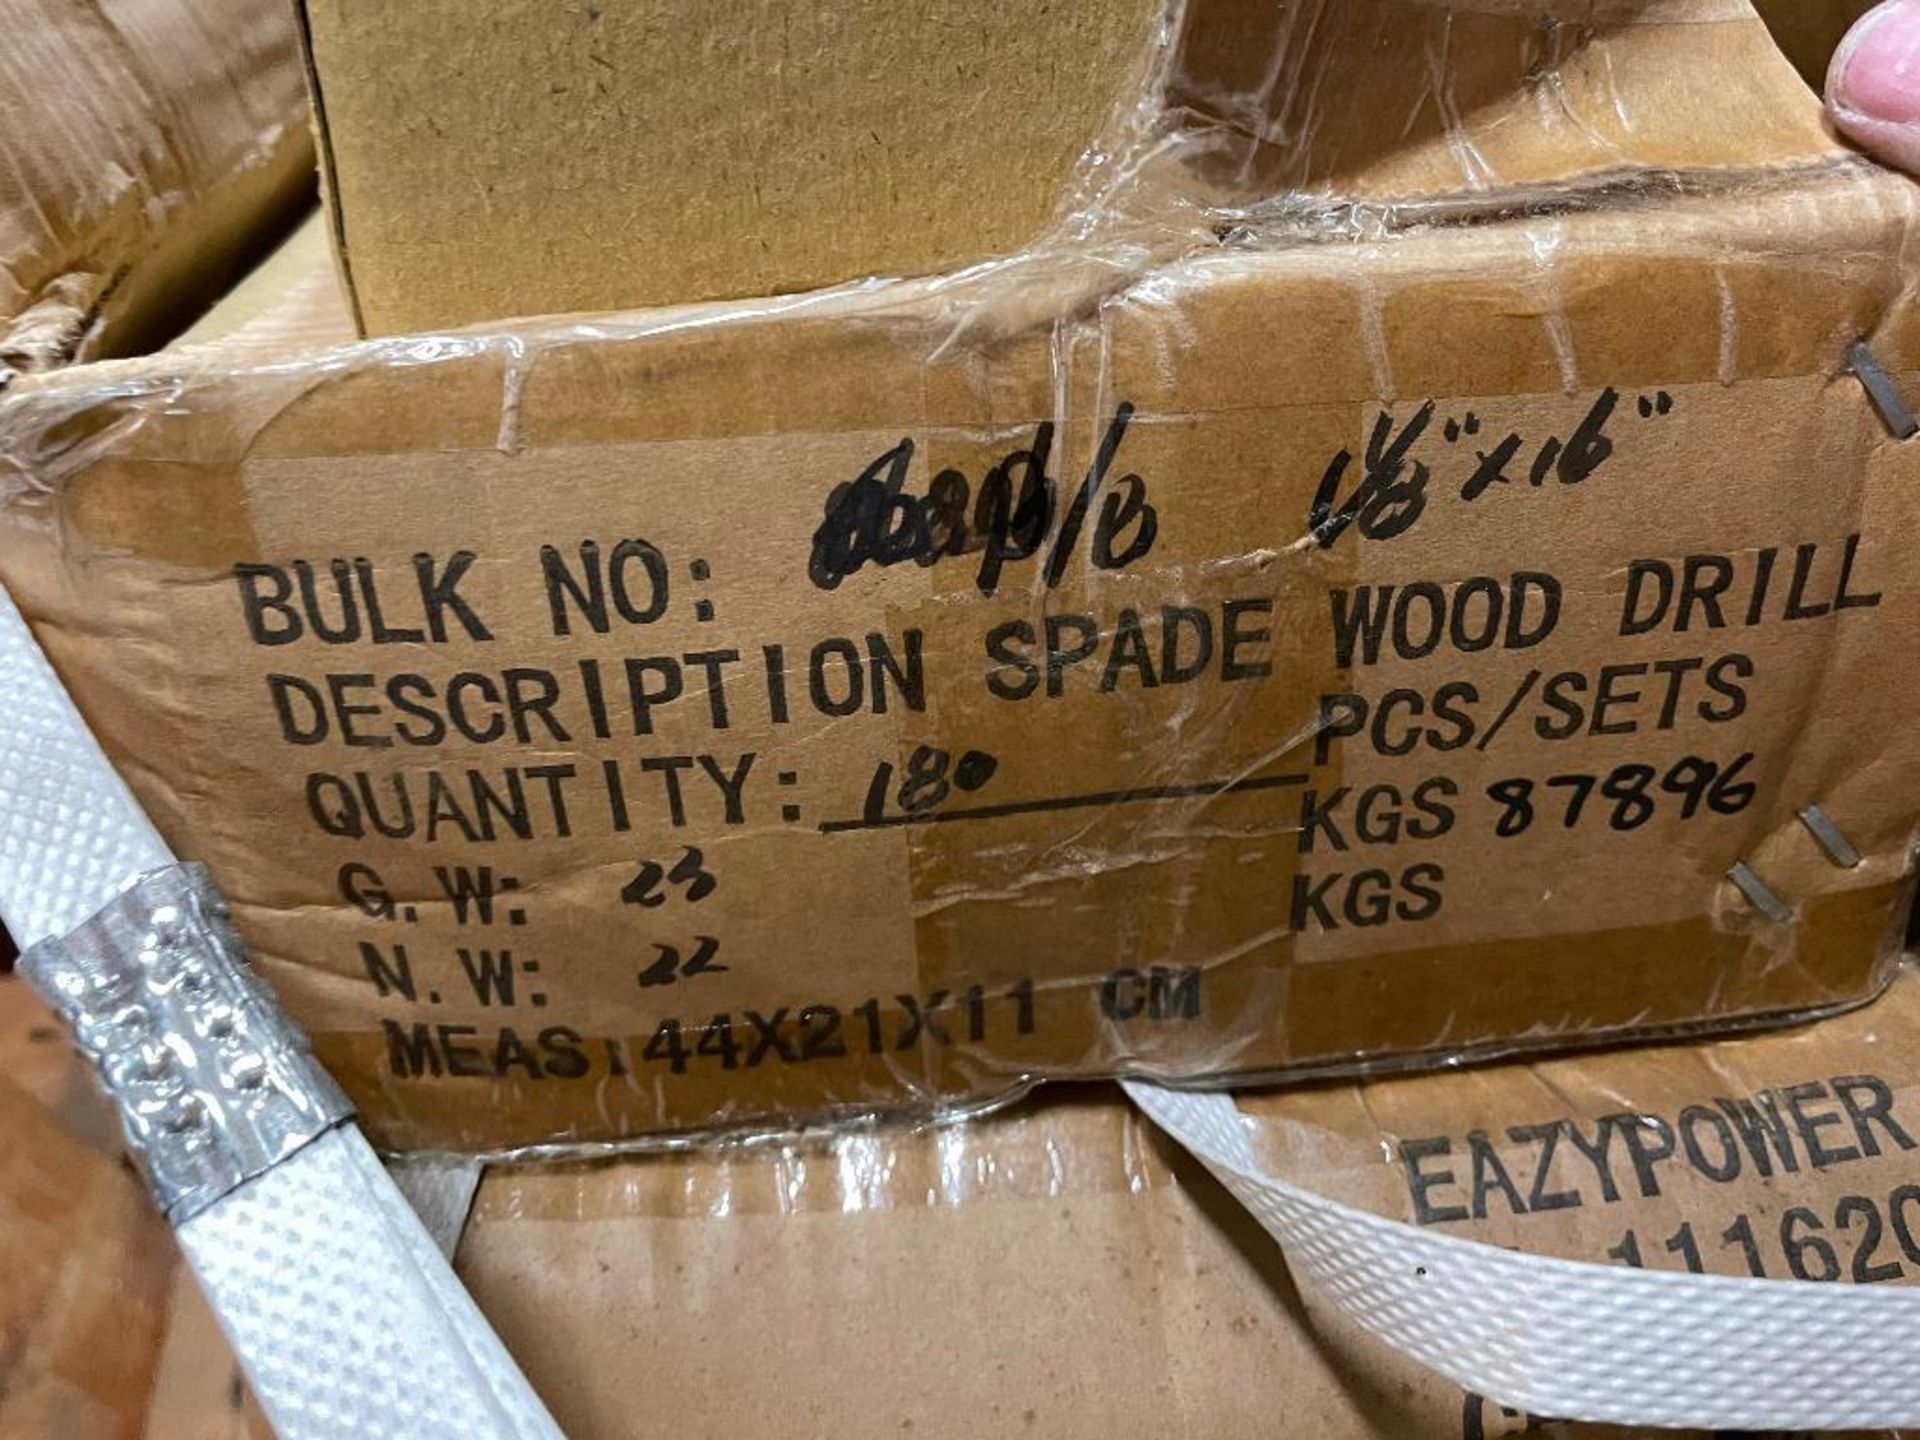 DESCRIPTION (2) CASES OF 1 1/8" X 16" SPADE WOOD DRILL. 320 PER CASE. BRAND / MODEL EAZY POWER 86896 - Image 3 of 3